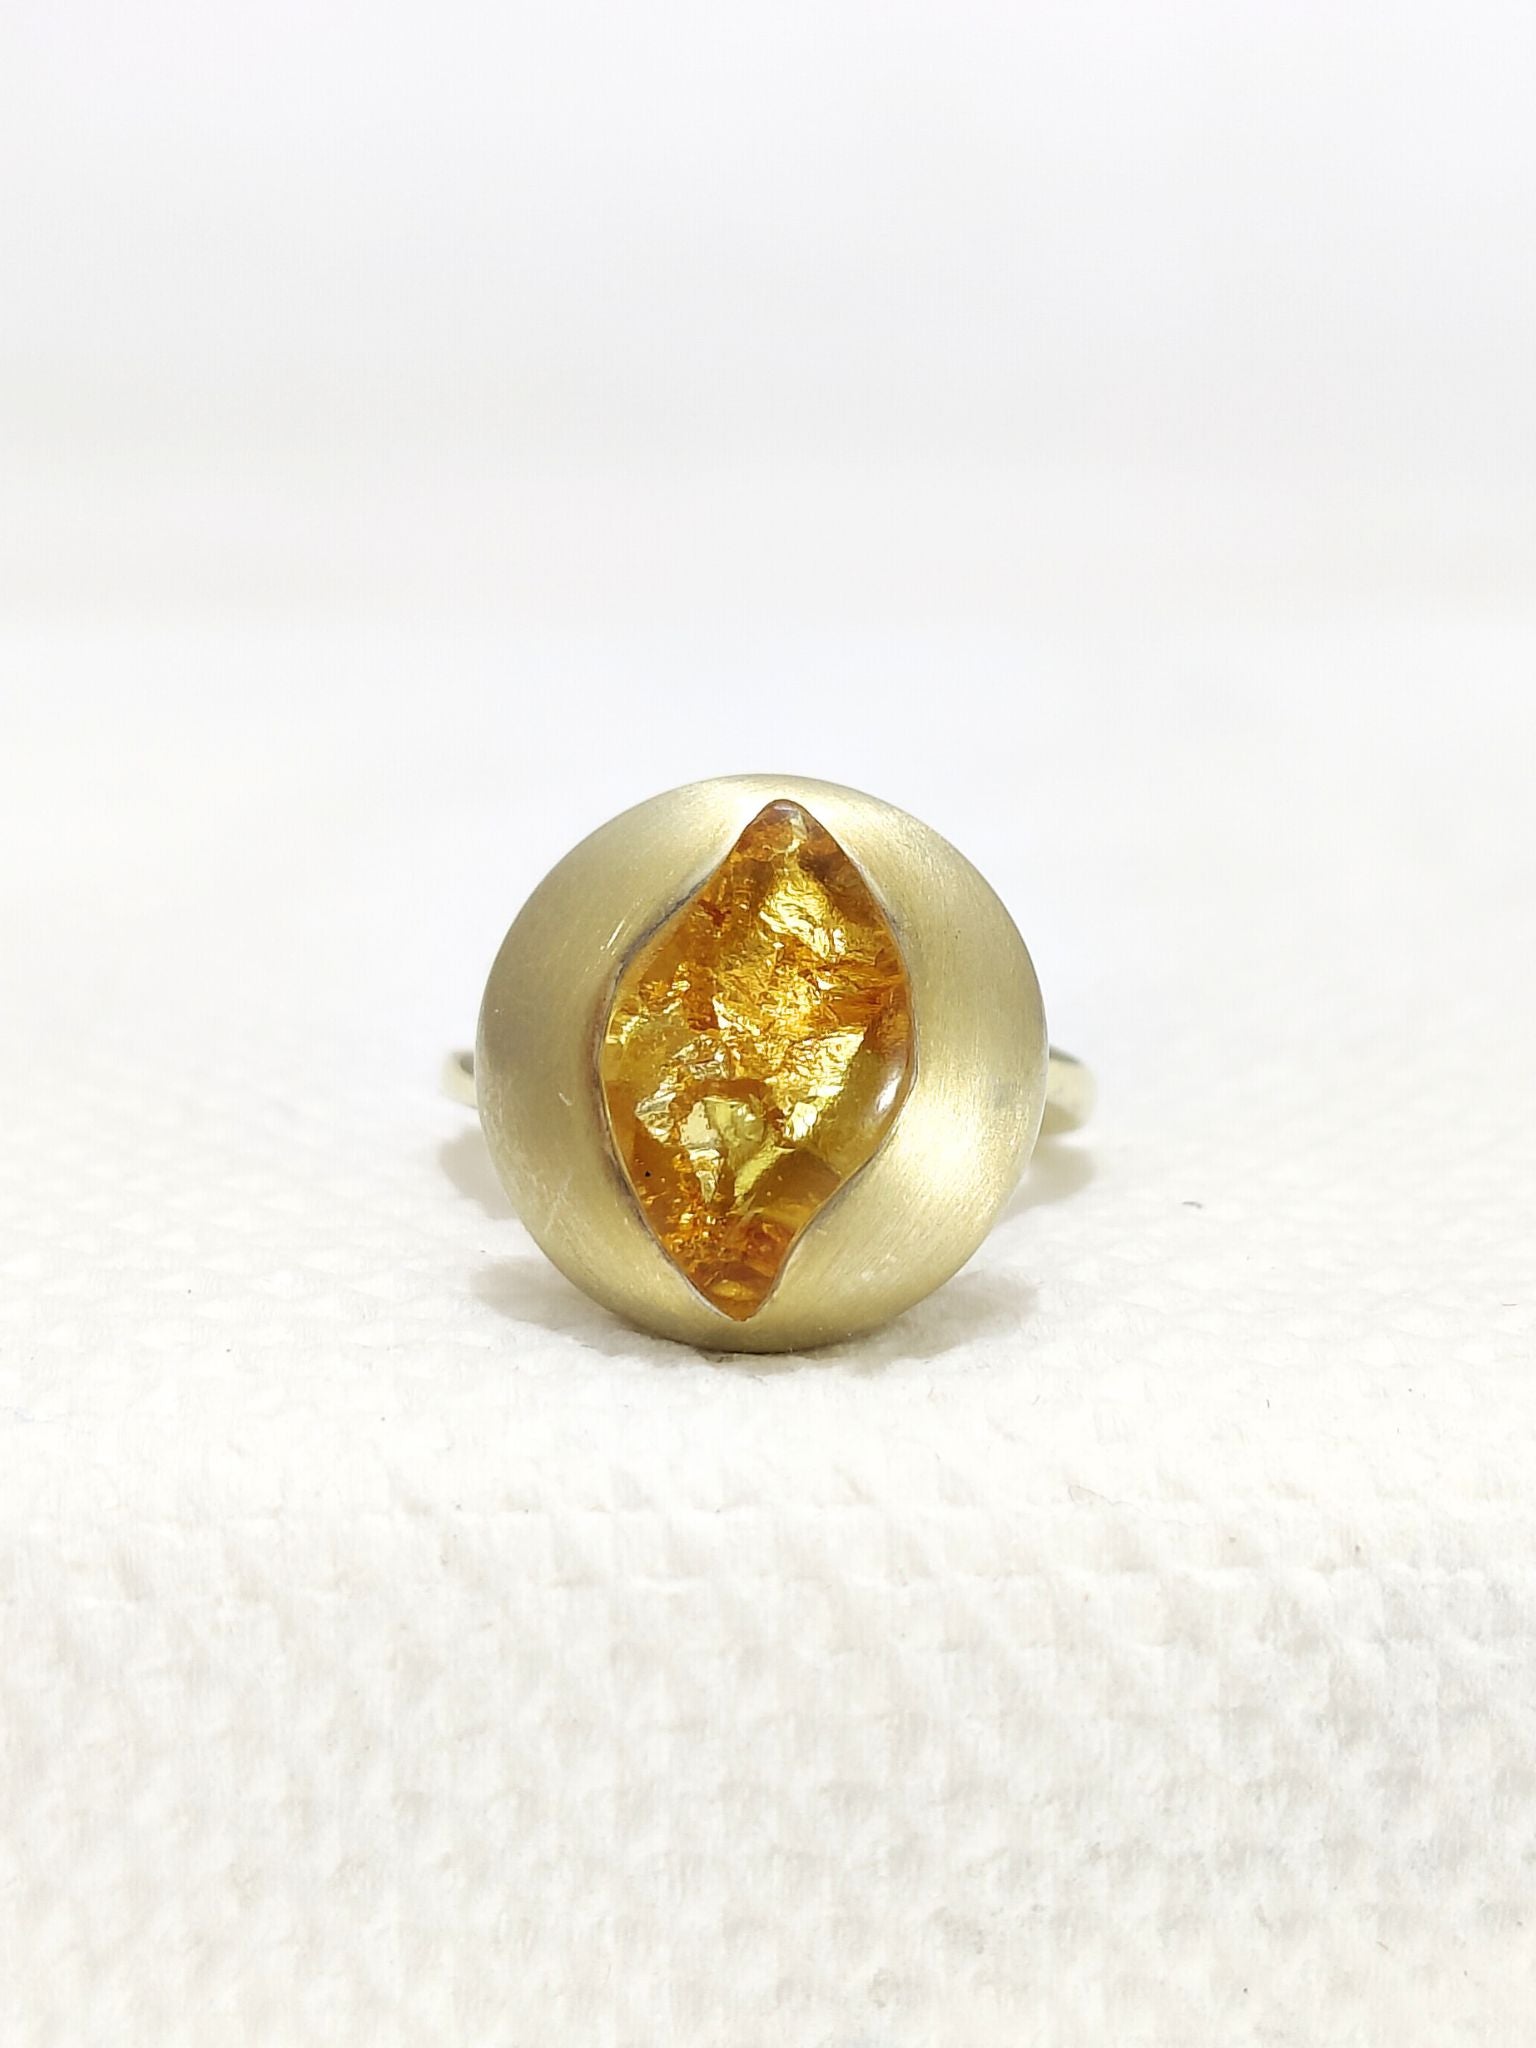 Beautiful Amber Sterling Silver Ring